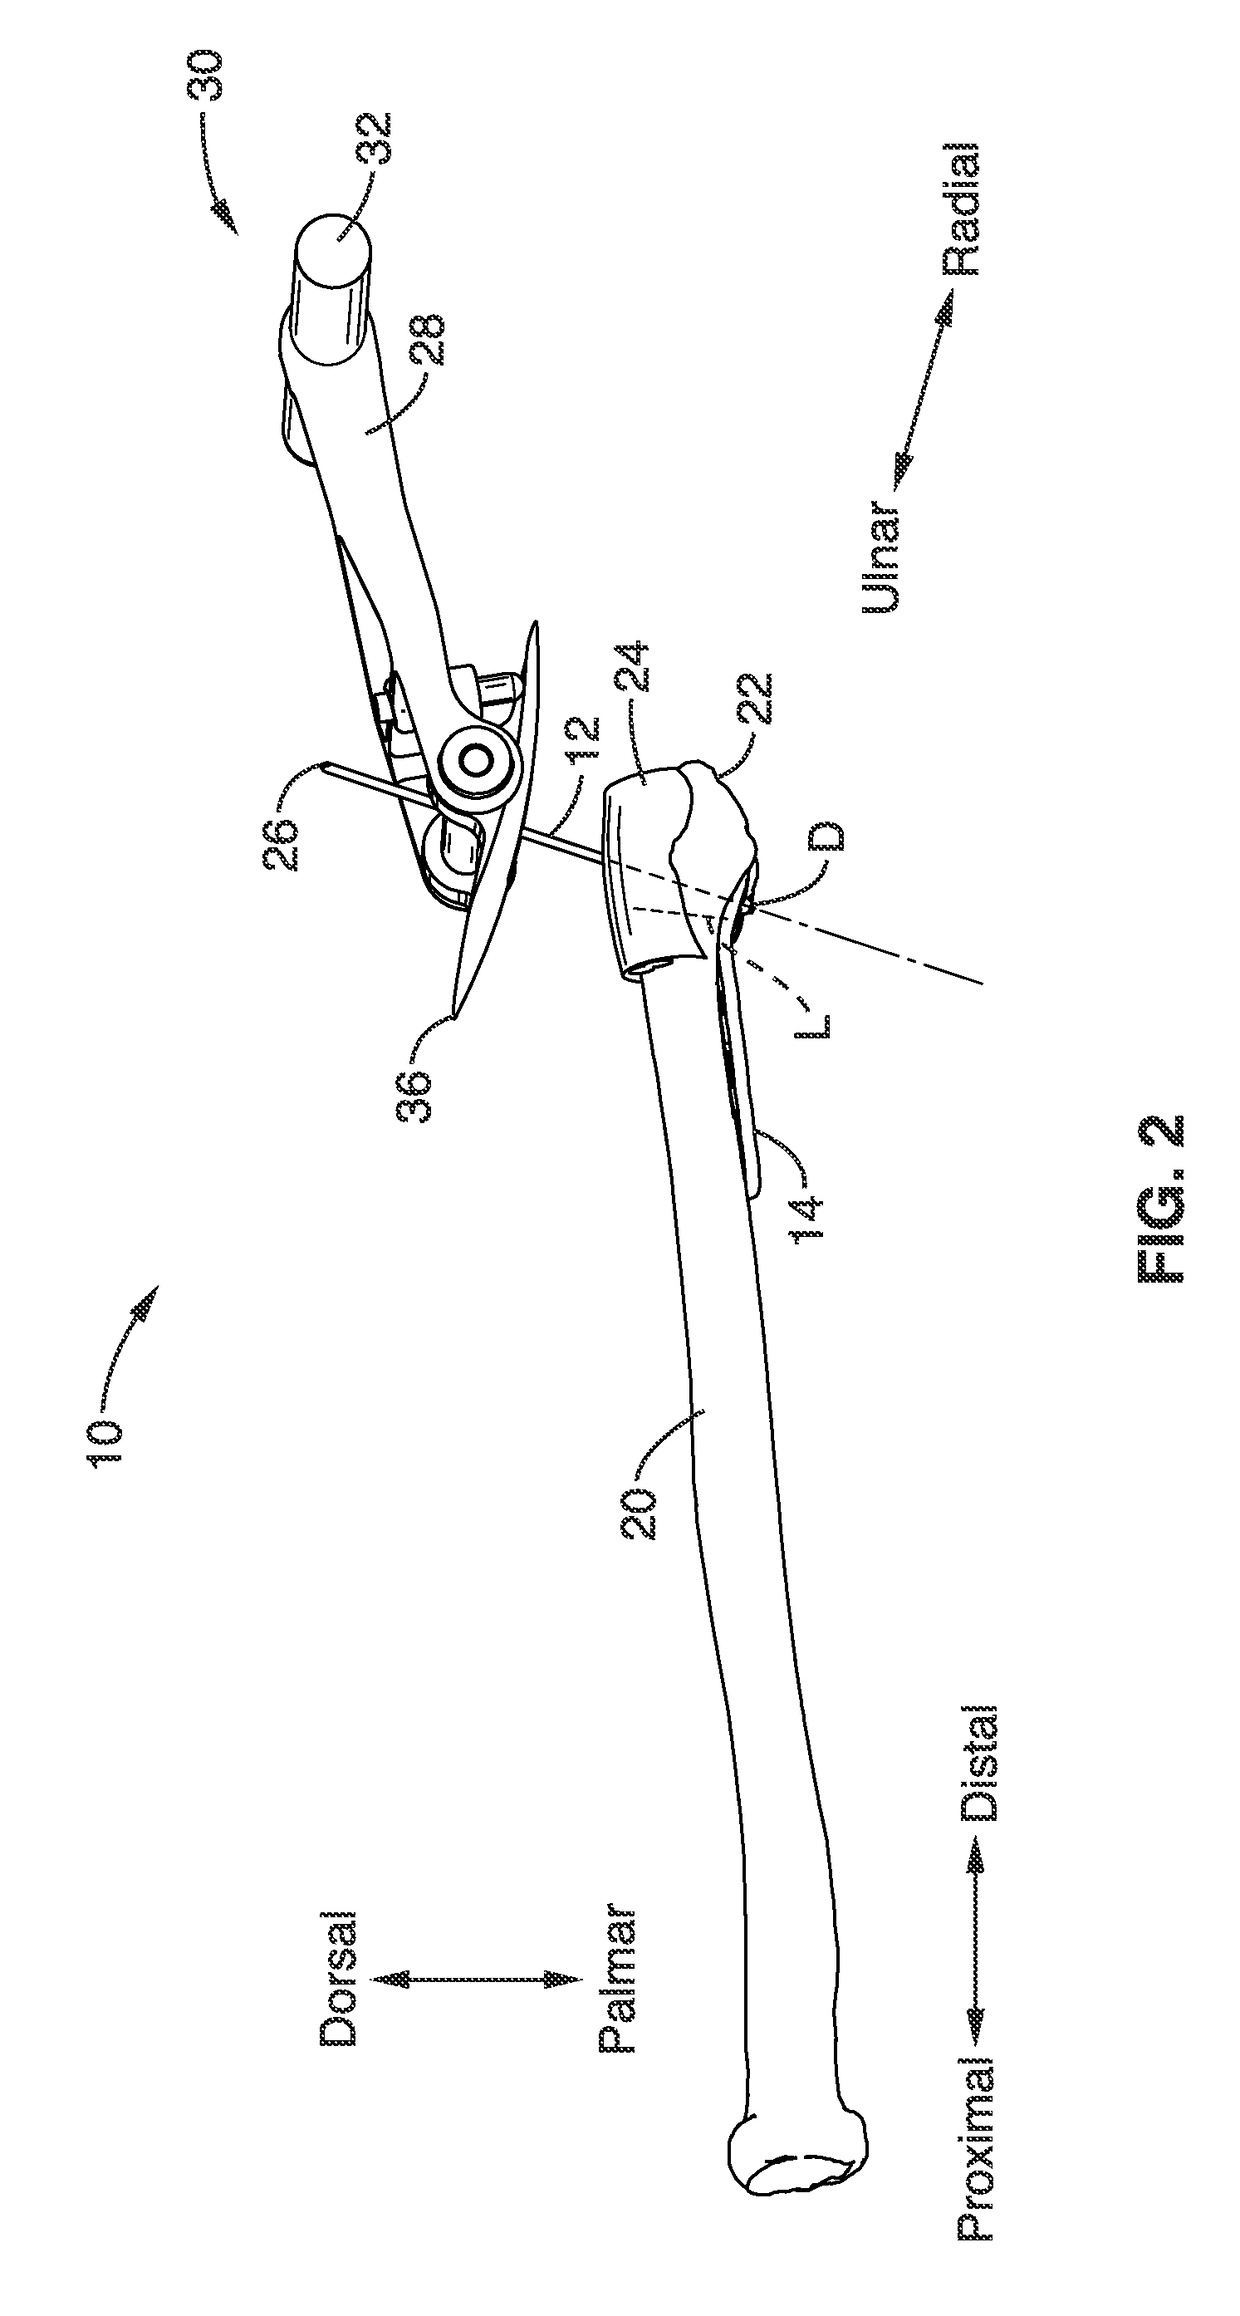 Method and apparatus for fracture reduction during internal fixation of distal radius fractures